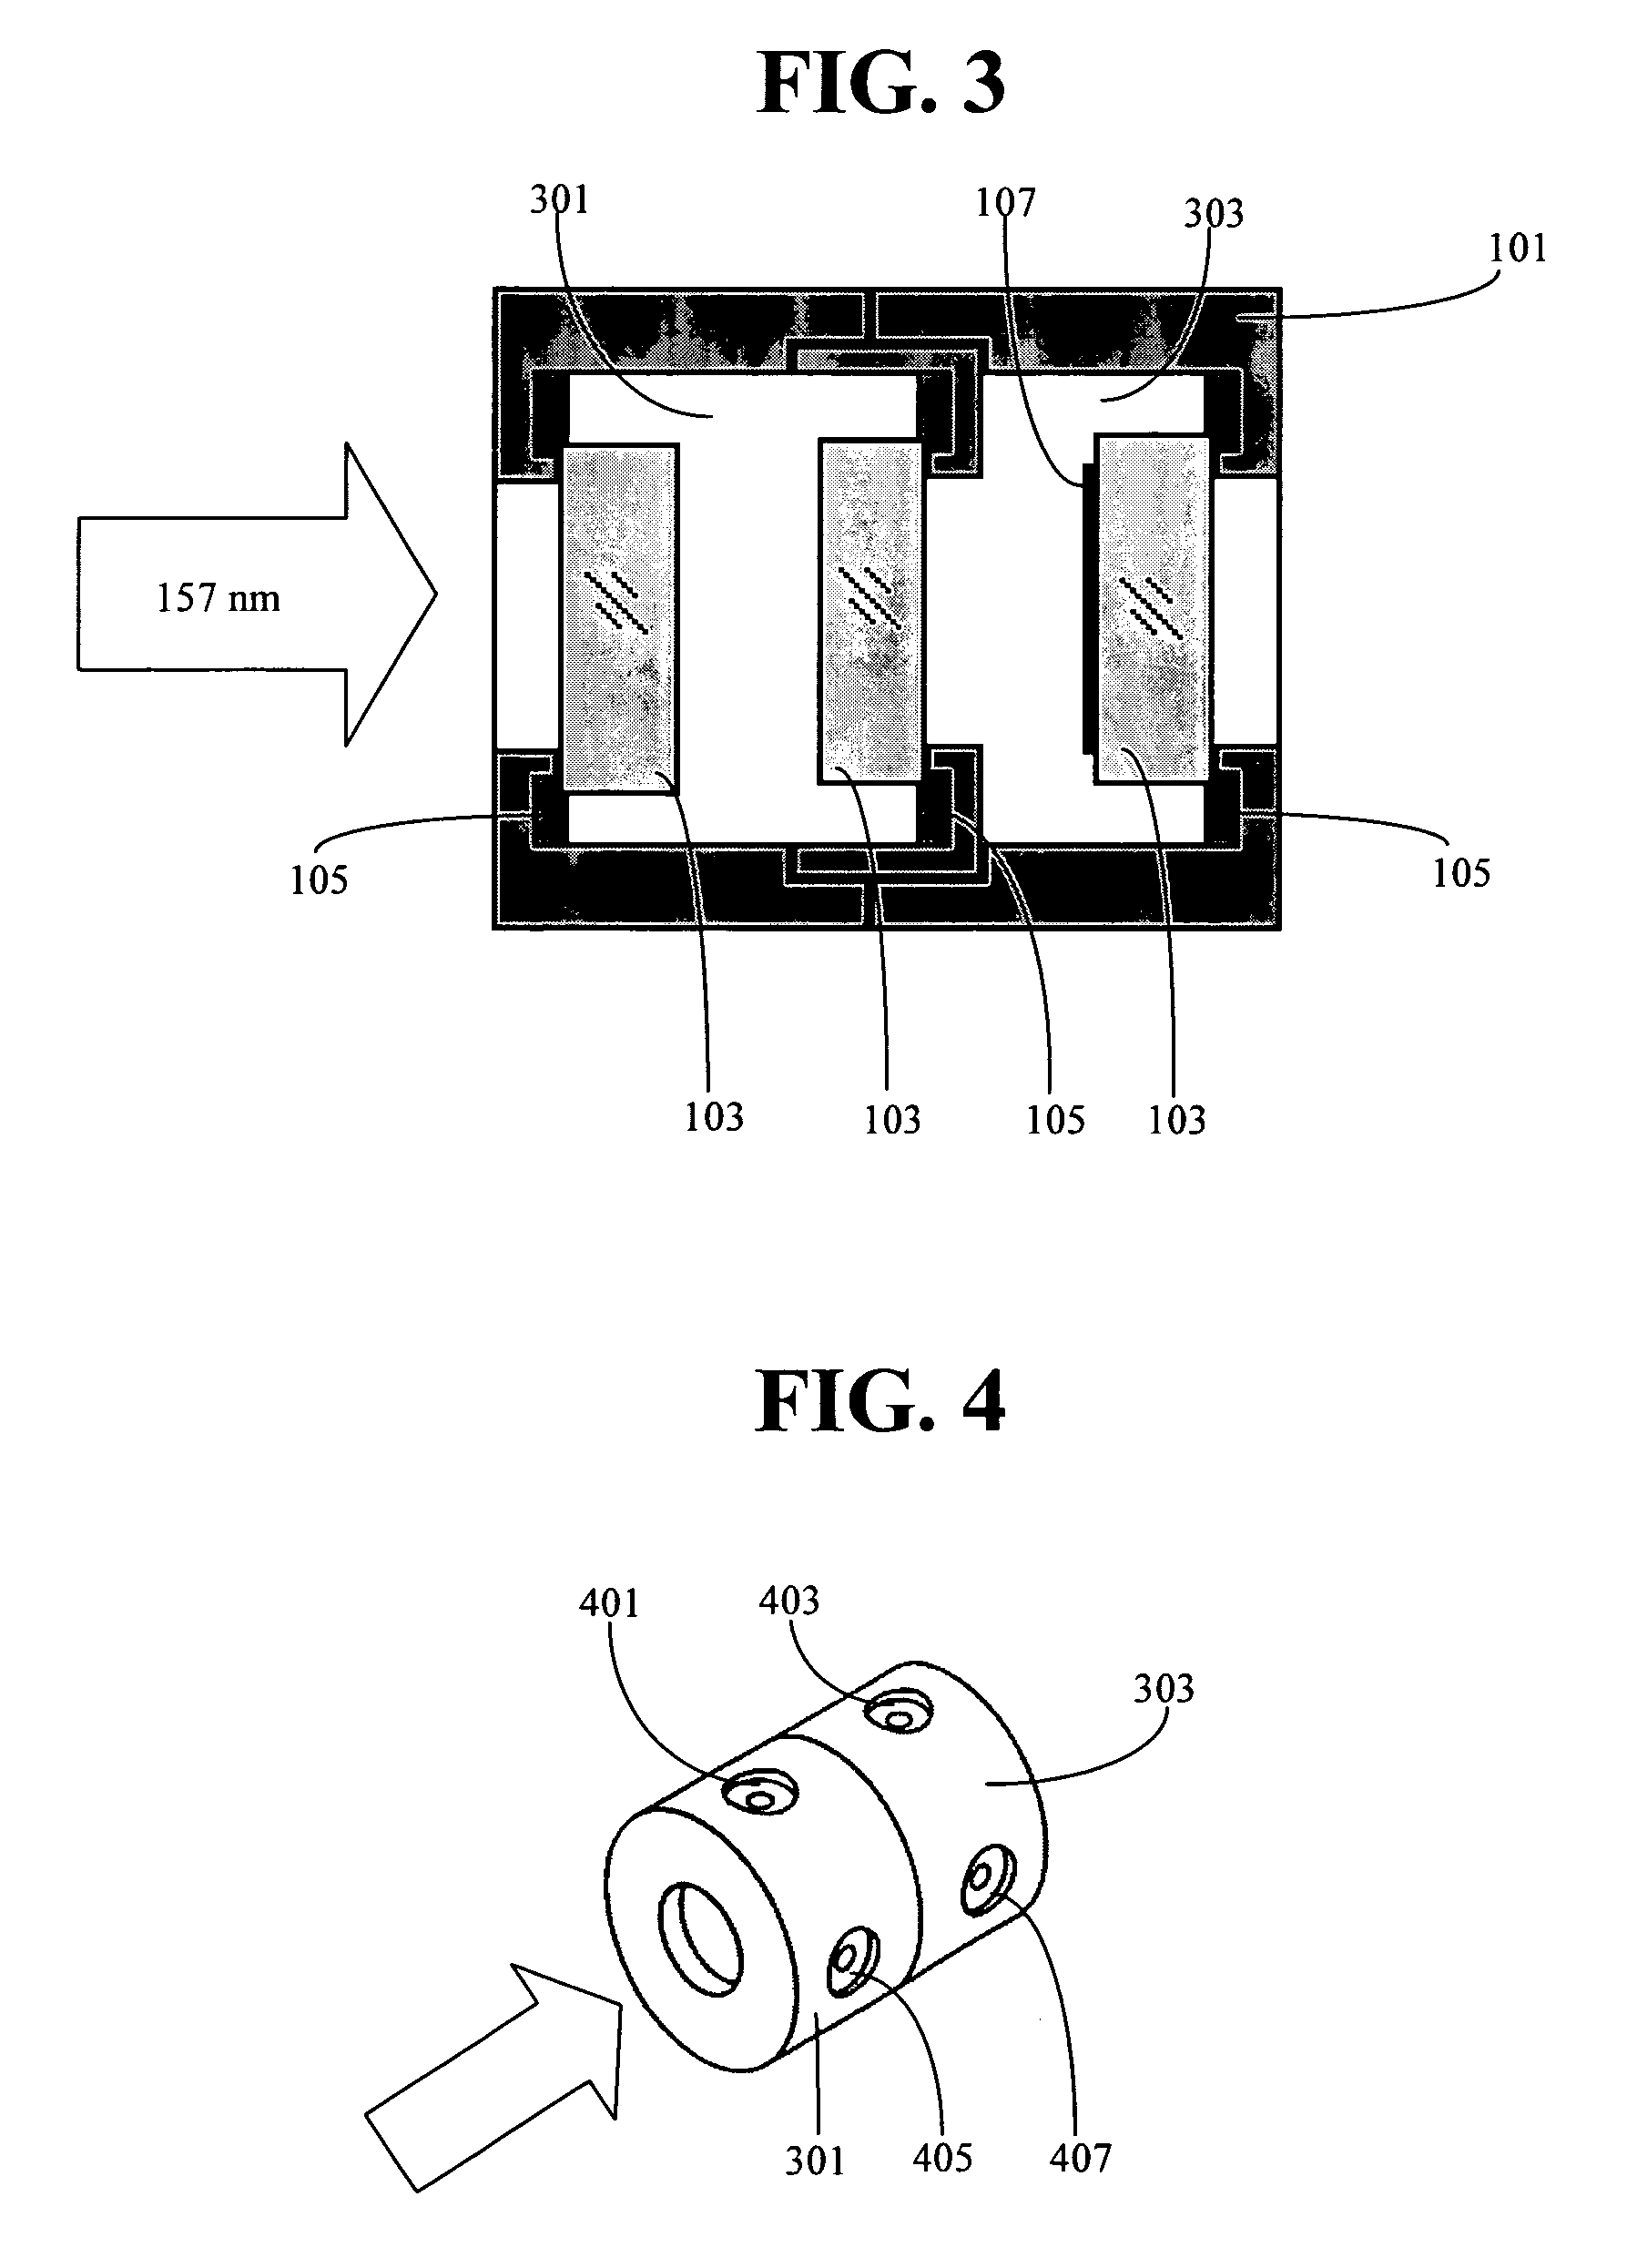 Low outgassing photo or electron beam curable rubbery polymer material, preparation thereof and device comprising same